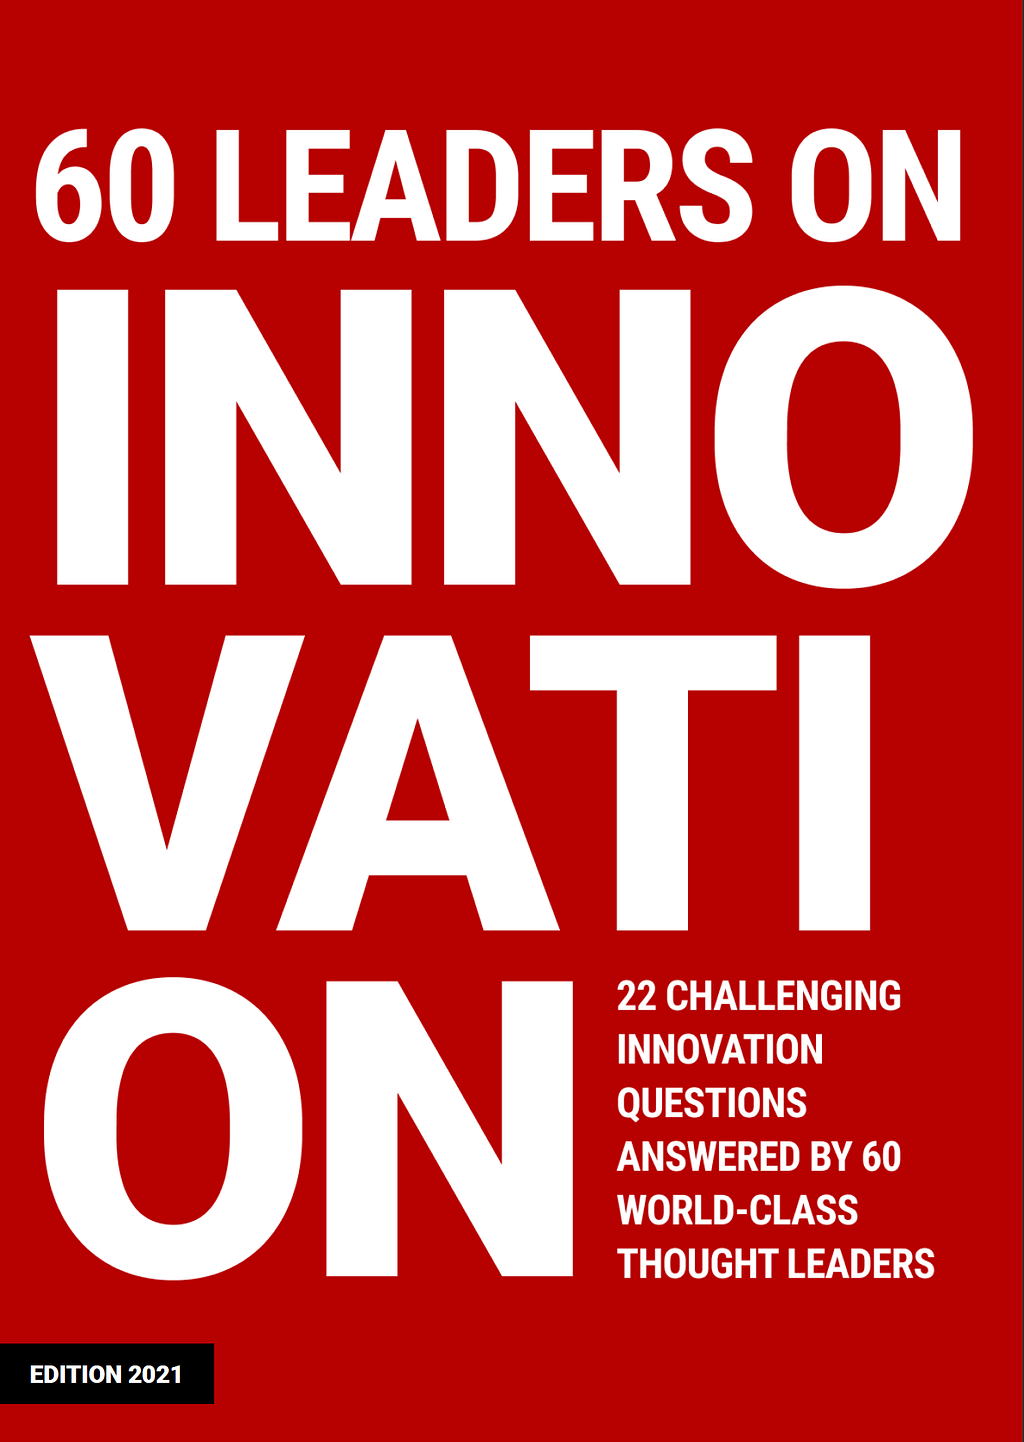 60 leaders answer 22 corporate innovation questions